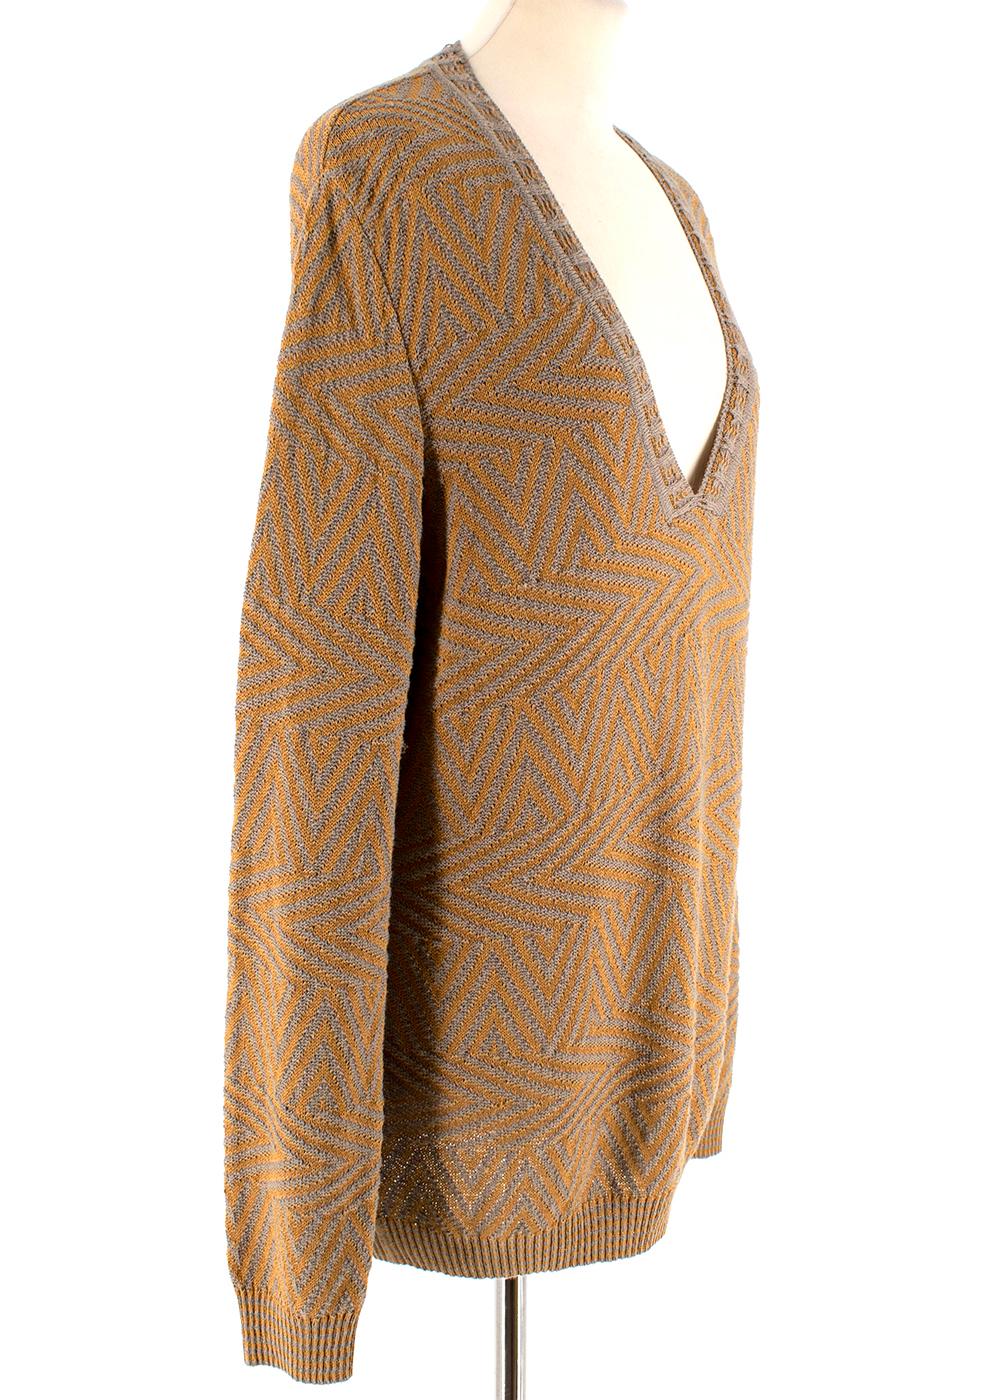 Missoni Orange/Grey Embroidered Knit V-Neck Jumper

-V-Neck
-Elasticated Cuff Ribbing
-Elasticated Bottom Ribbing

Materials:
47% Cotton
21% Rayon
21% Linen
10% Nylon

Made in Italy
Measurements are taken laying flat, seam to seam. 

Shoulders:50